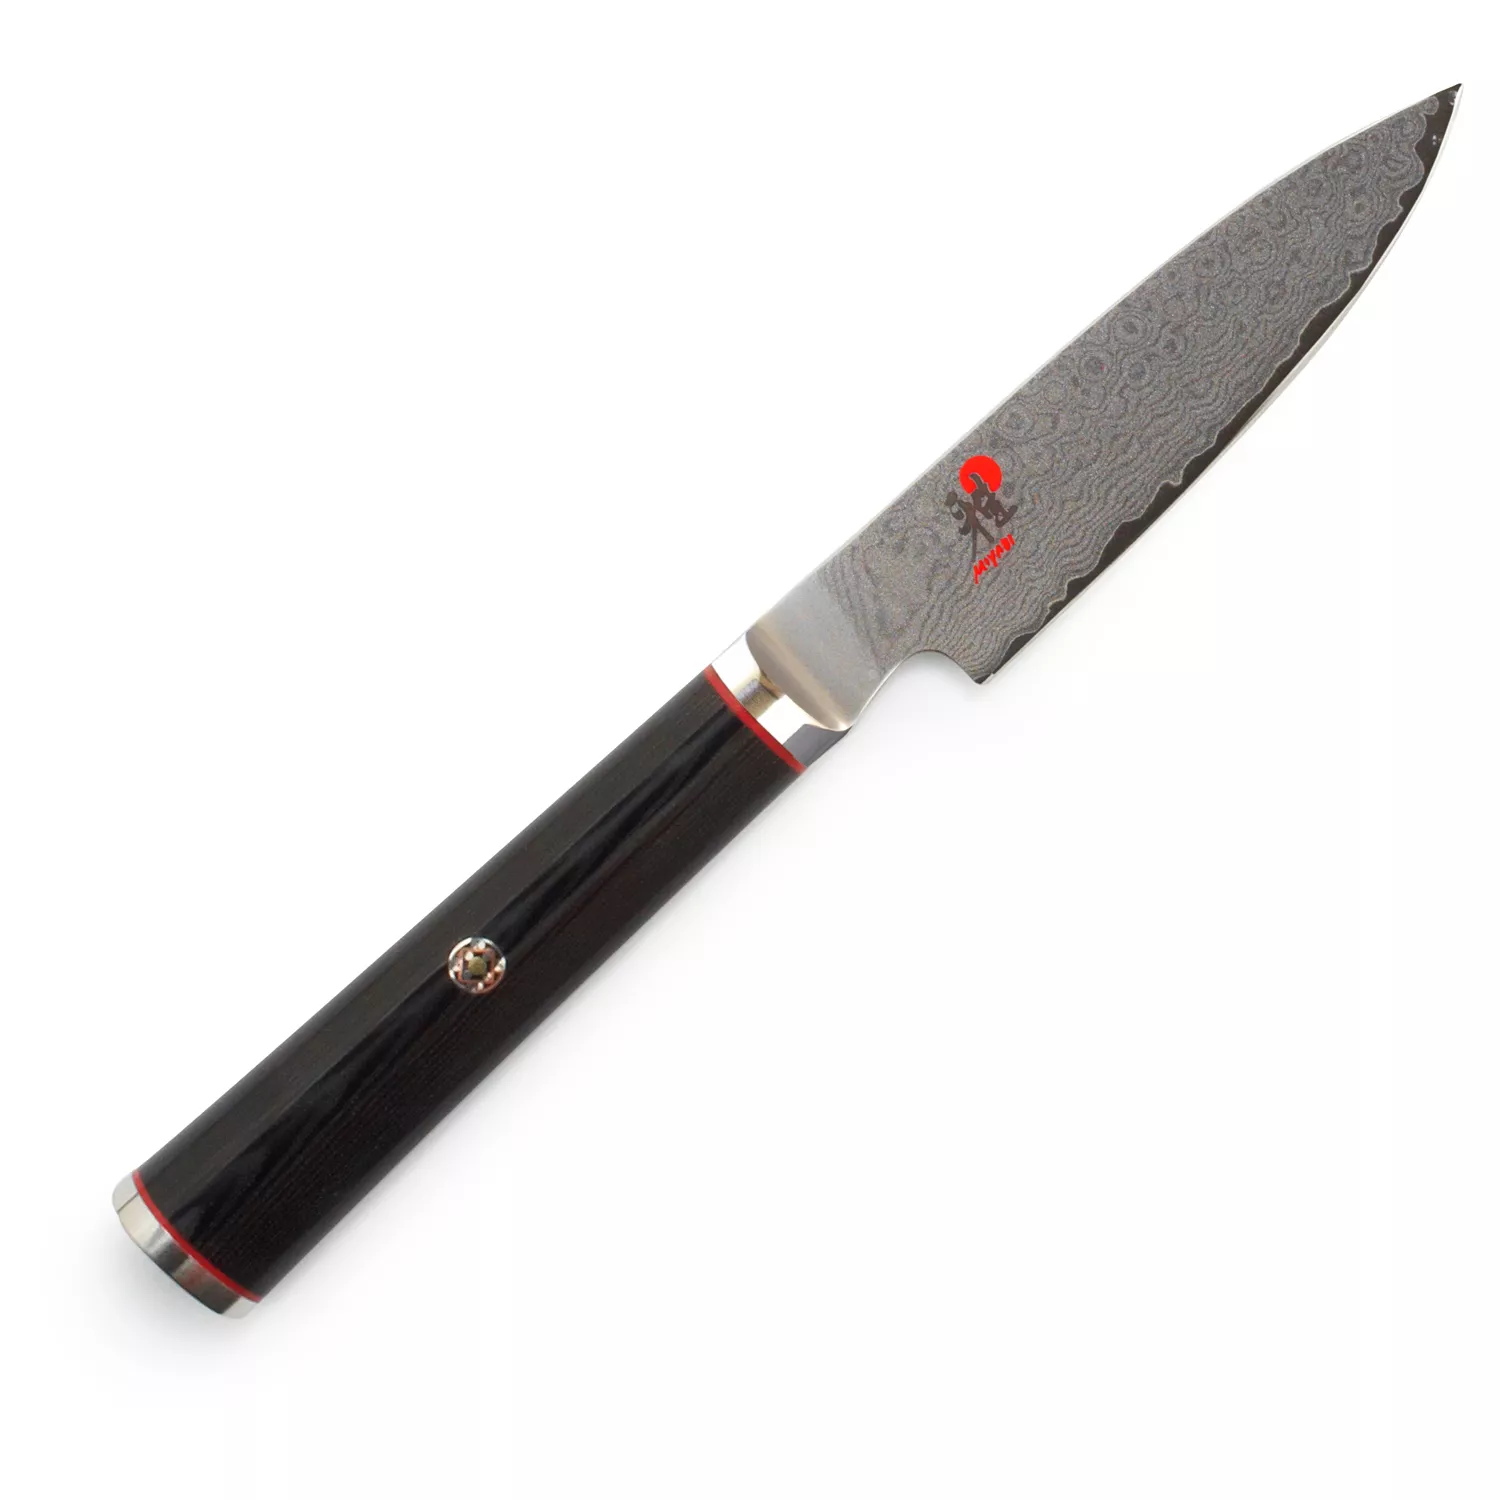  ZYLISS Paring Knife with Sheath Cover, 3.5-Inch